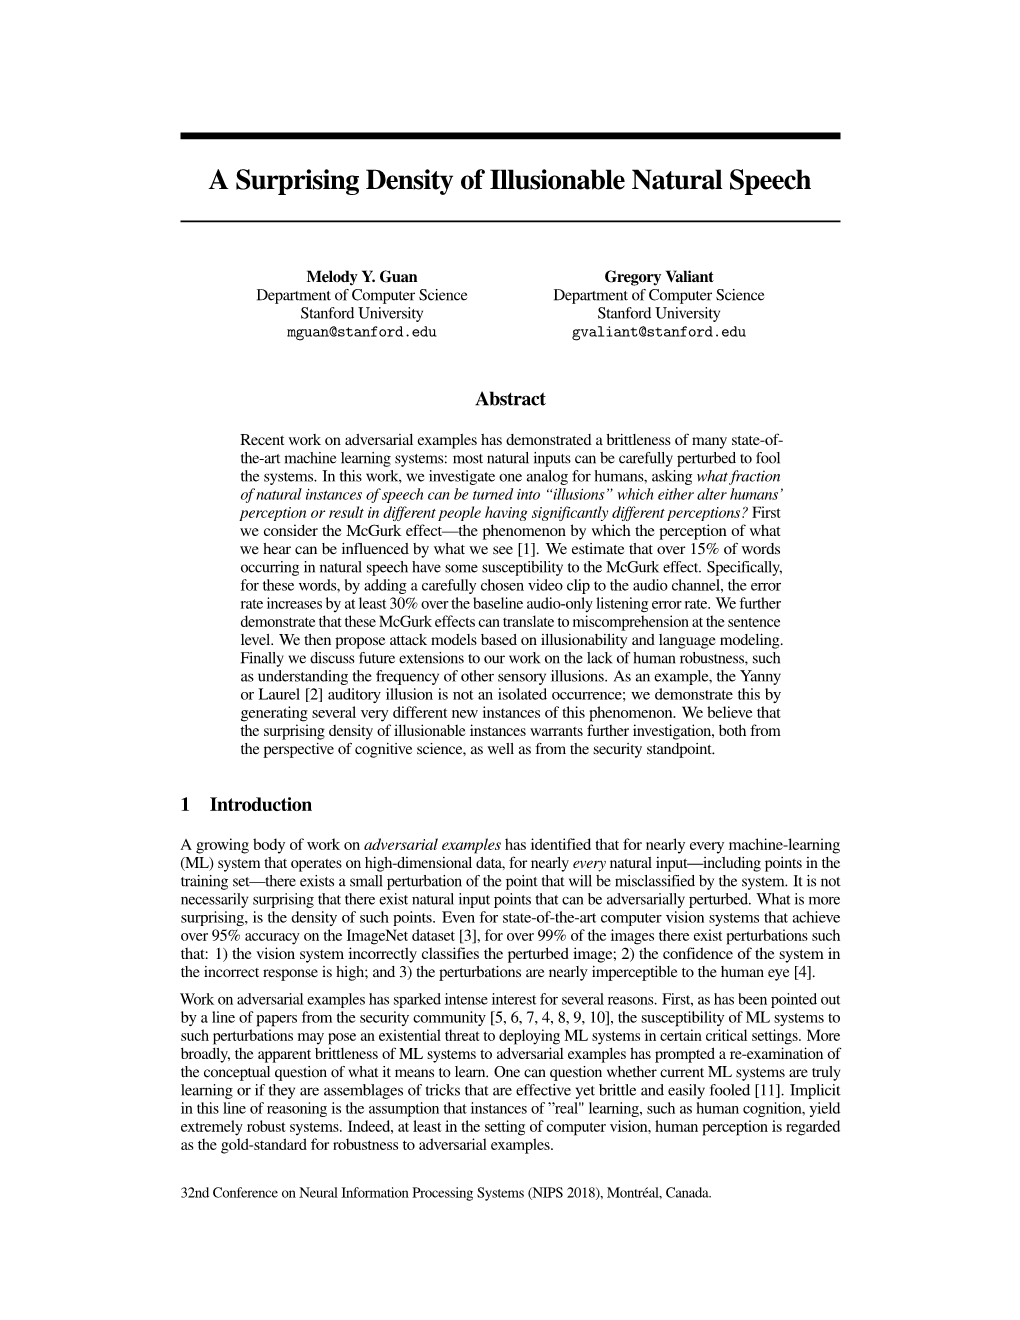 A Surprising Density of Illusionable Natural Speech